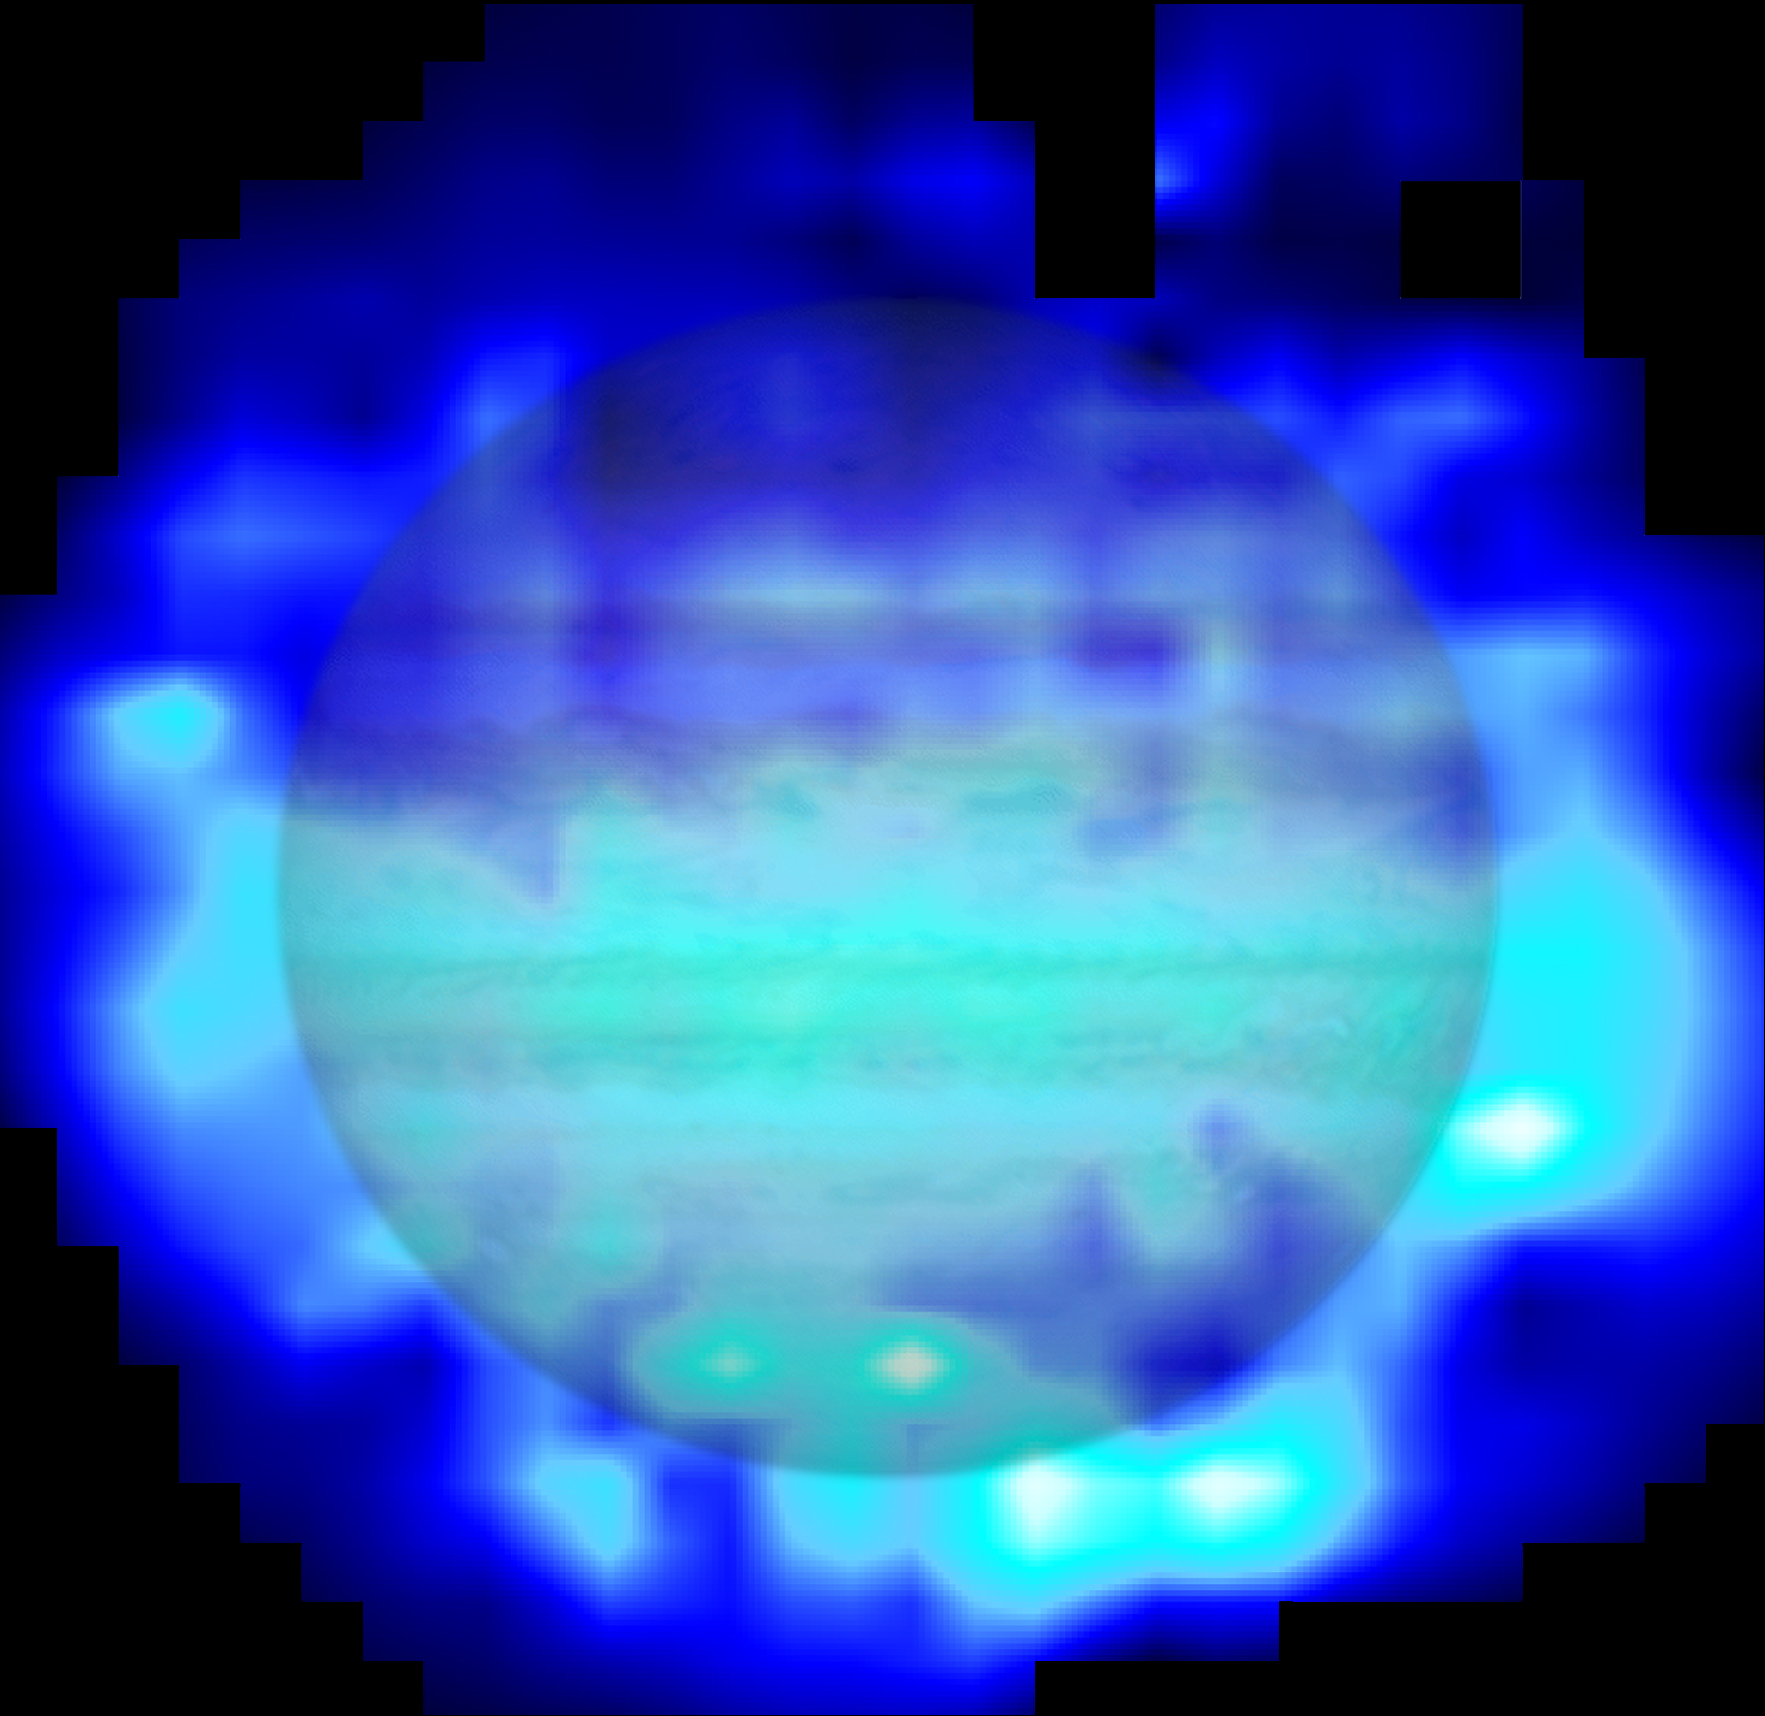 jupiter with a set of pixellated data showing water abundance on top